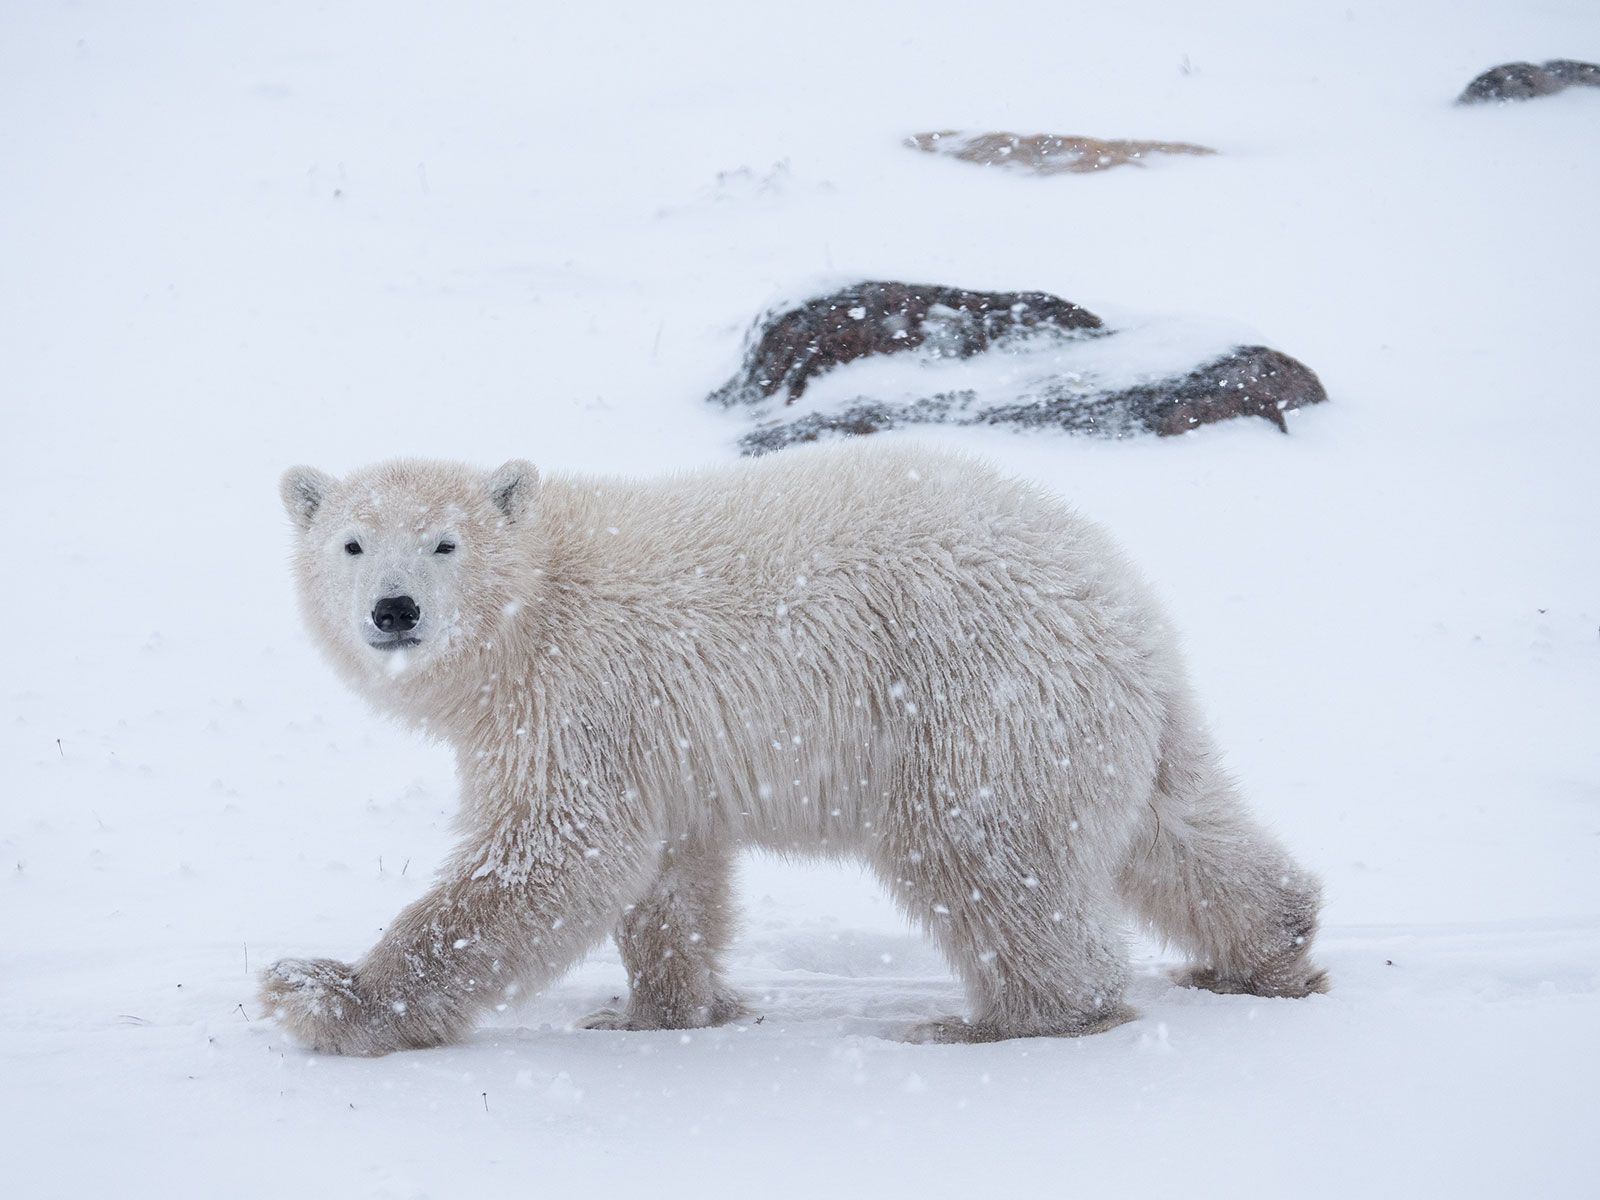 Make way for the Arctic's mighty mammal